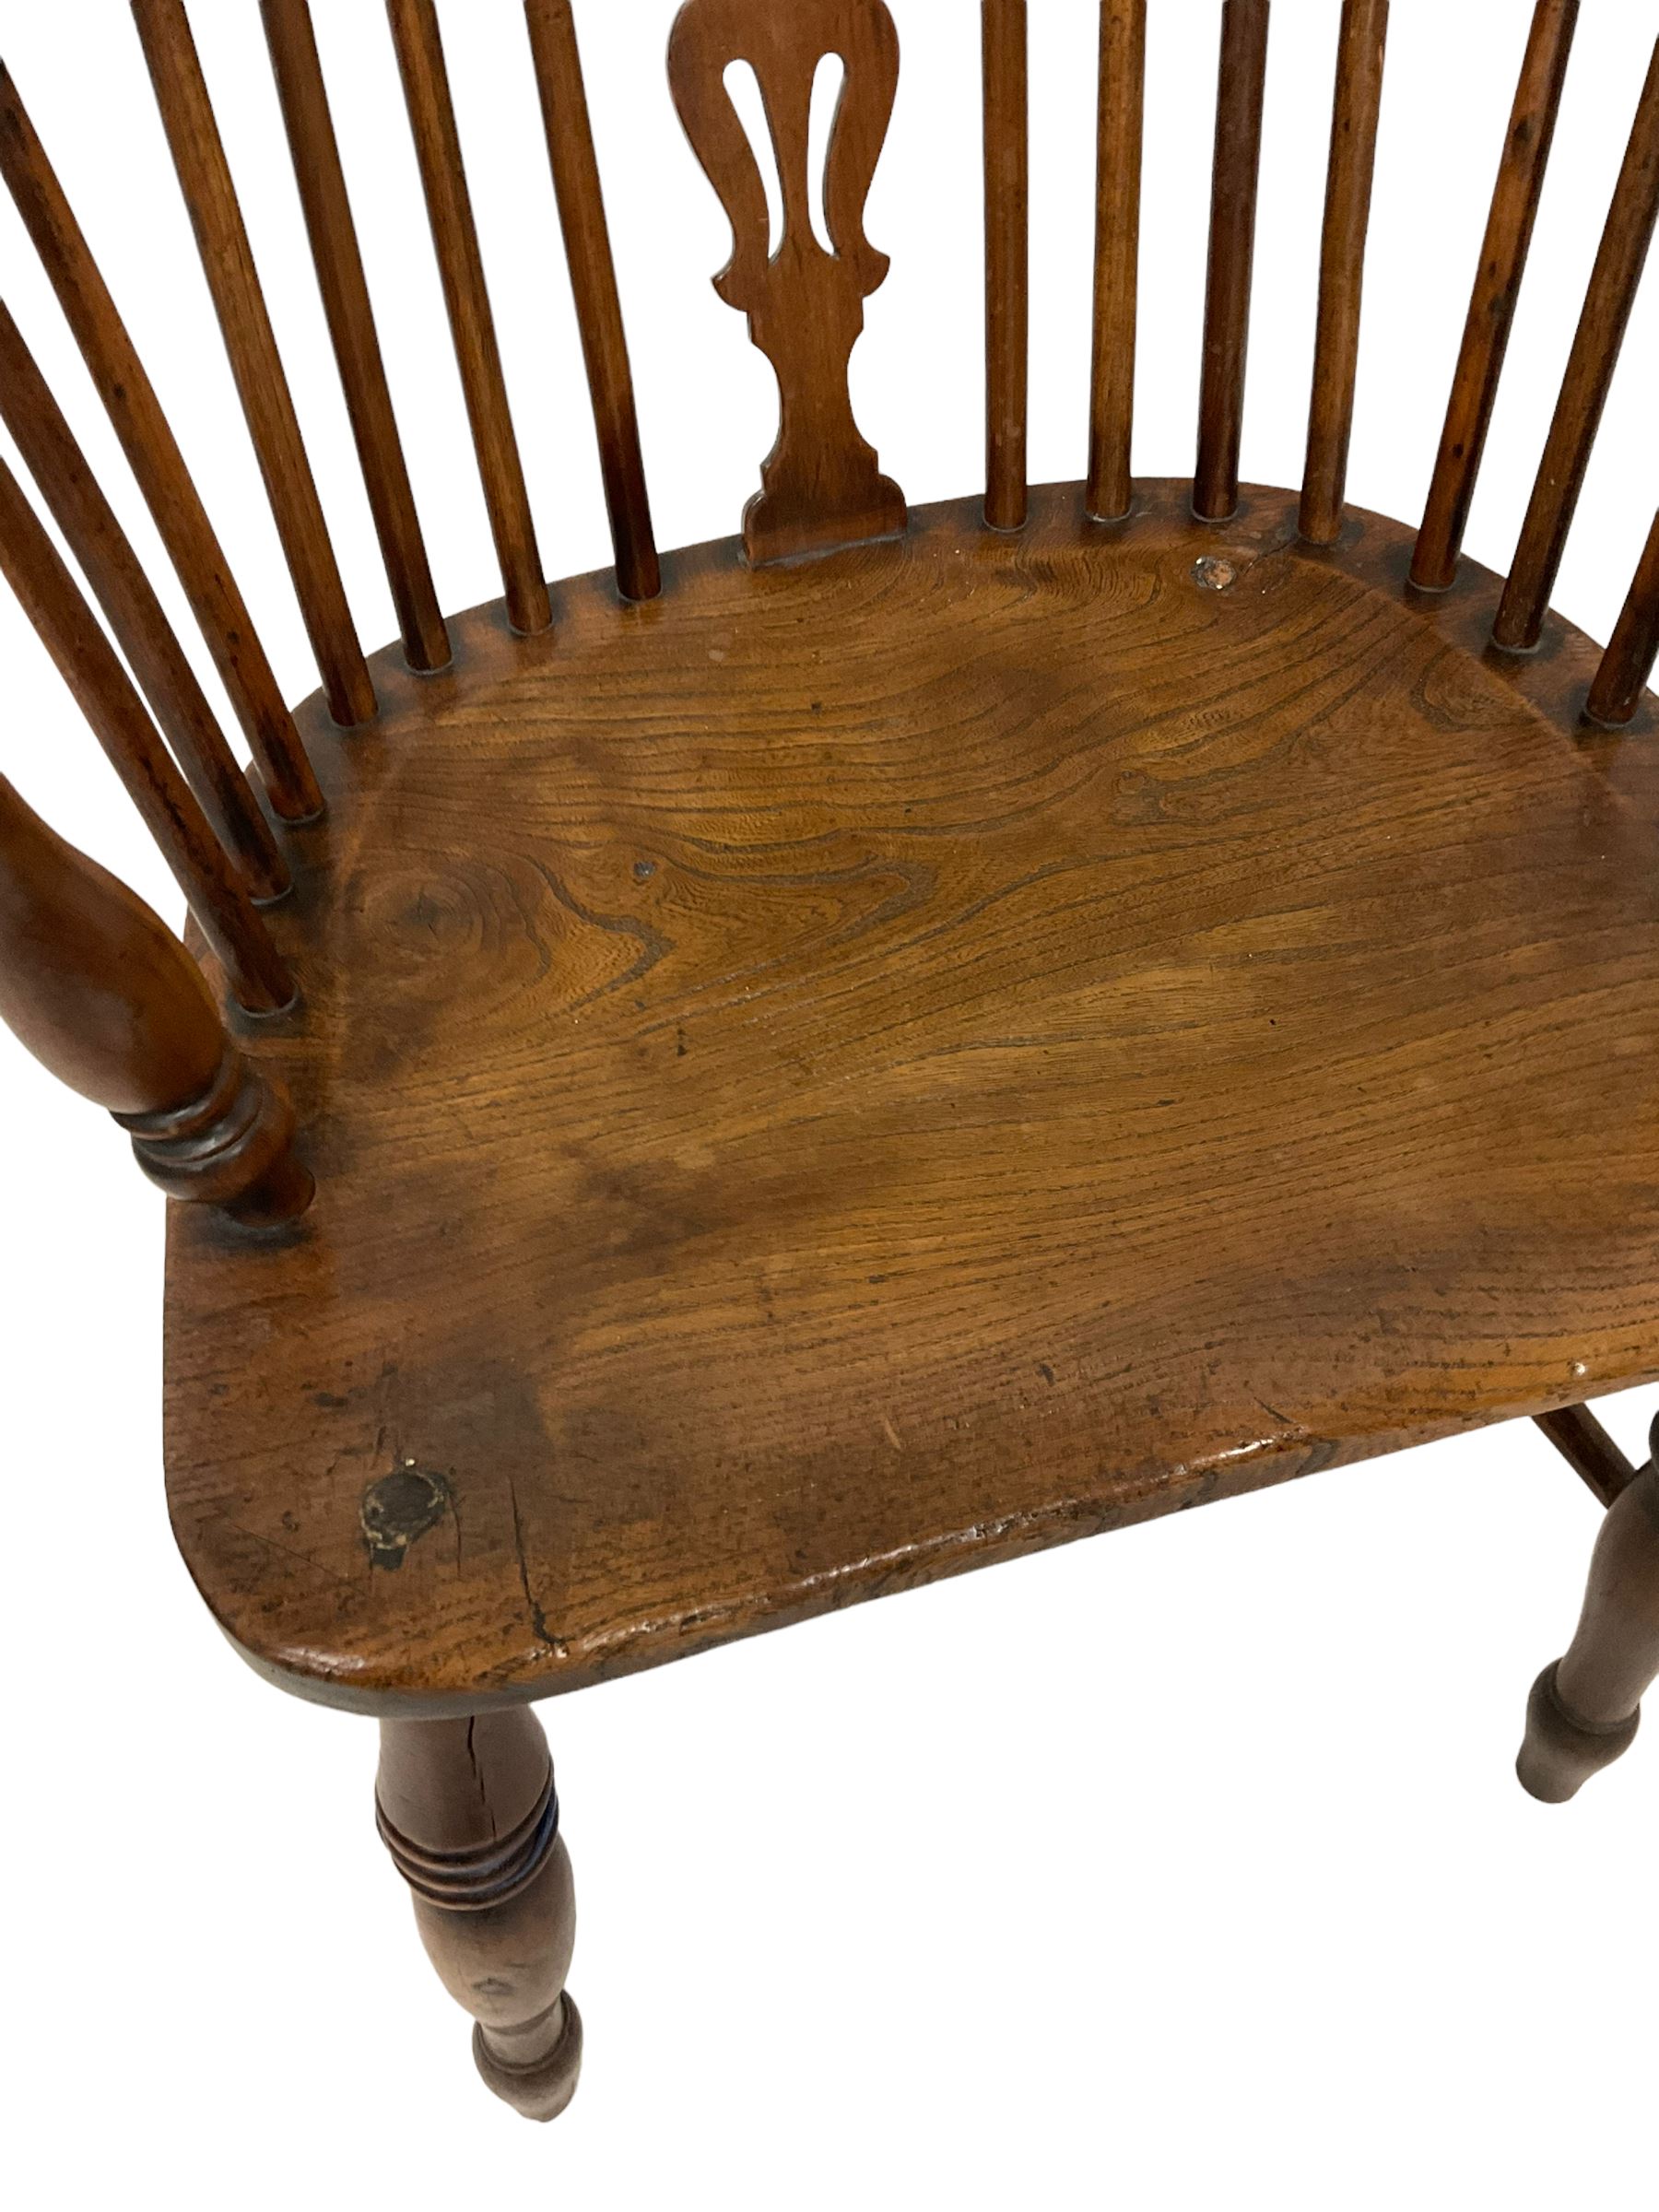 19th century elm and yew wood Windsor elbow chair - Image 3 of 4